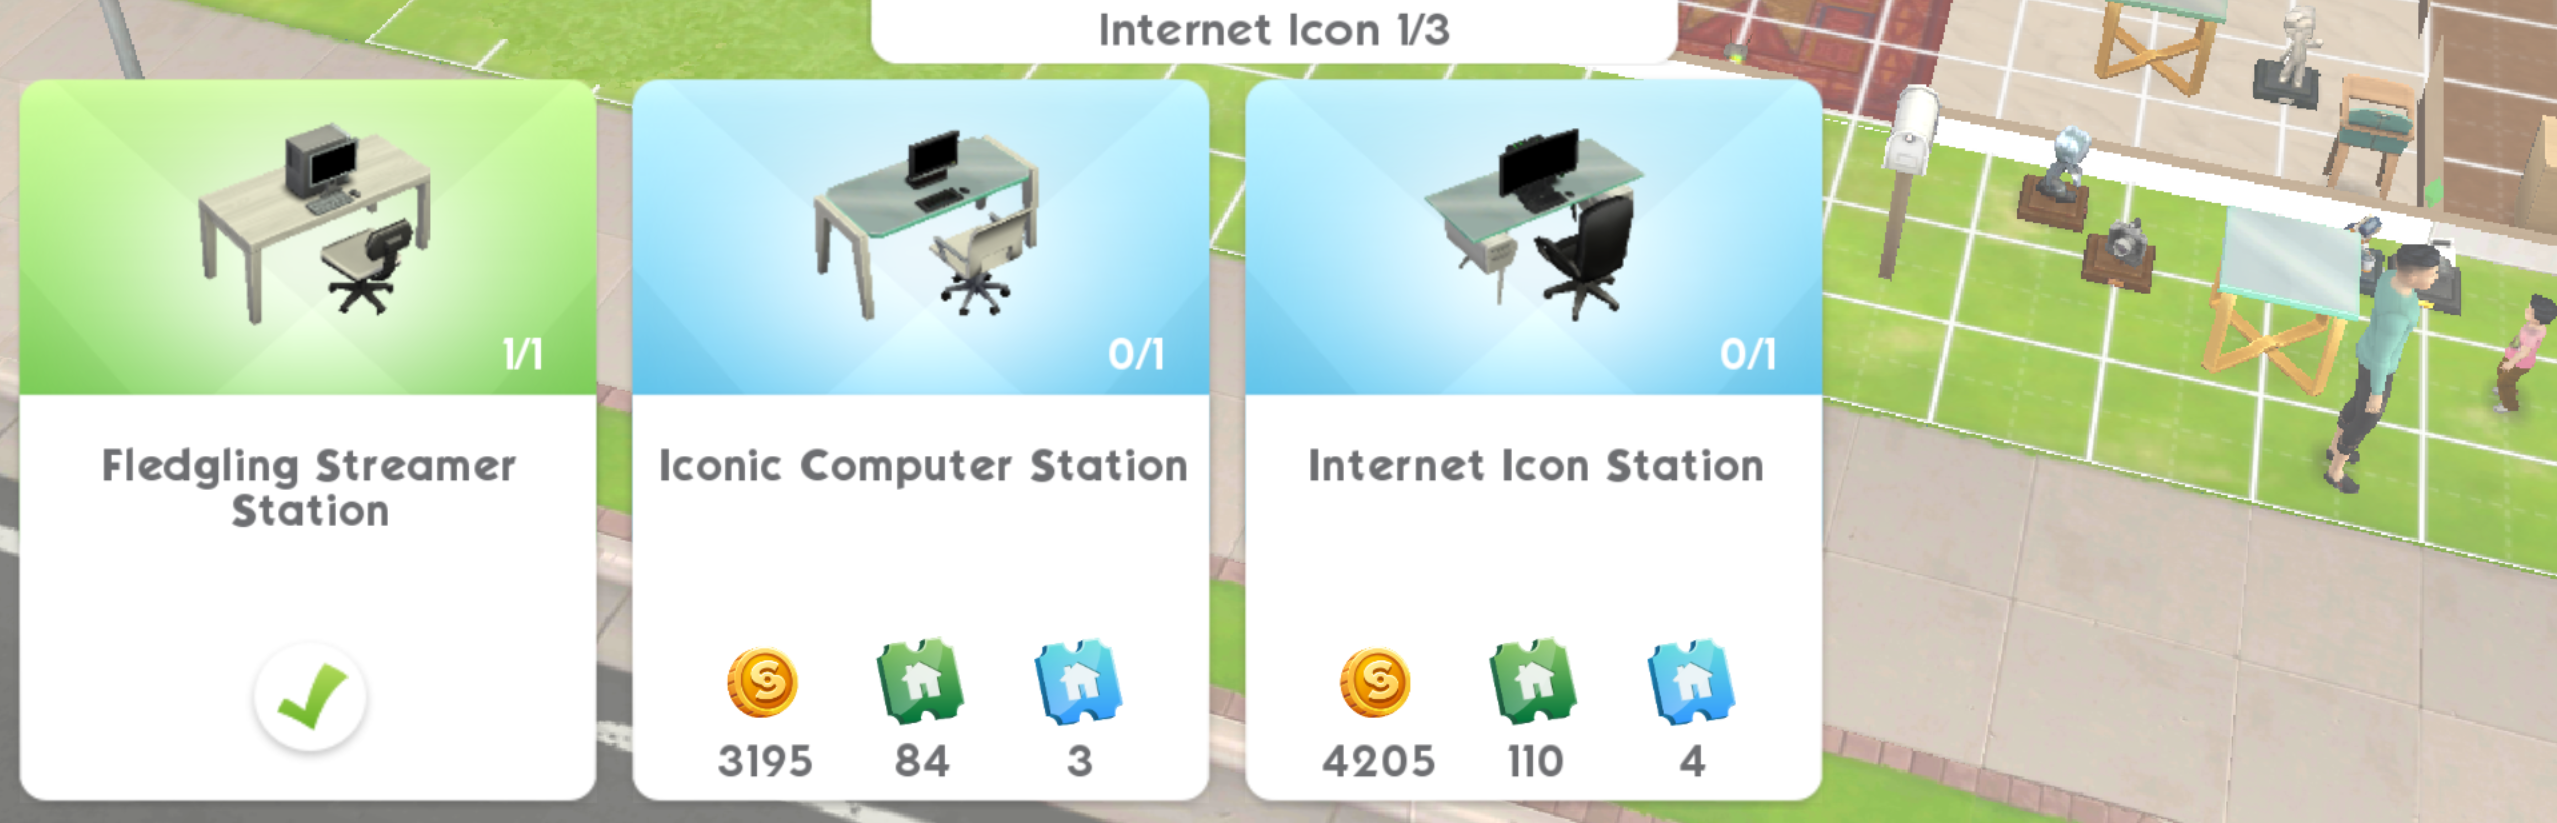 How To Complete and Unlock the Internet Icon Hobby Event in The